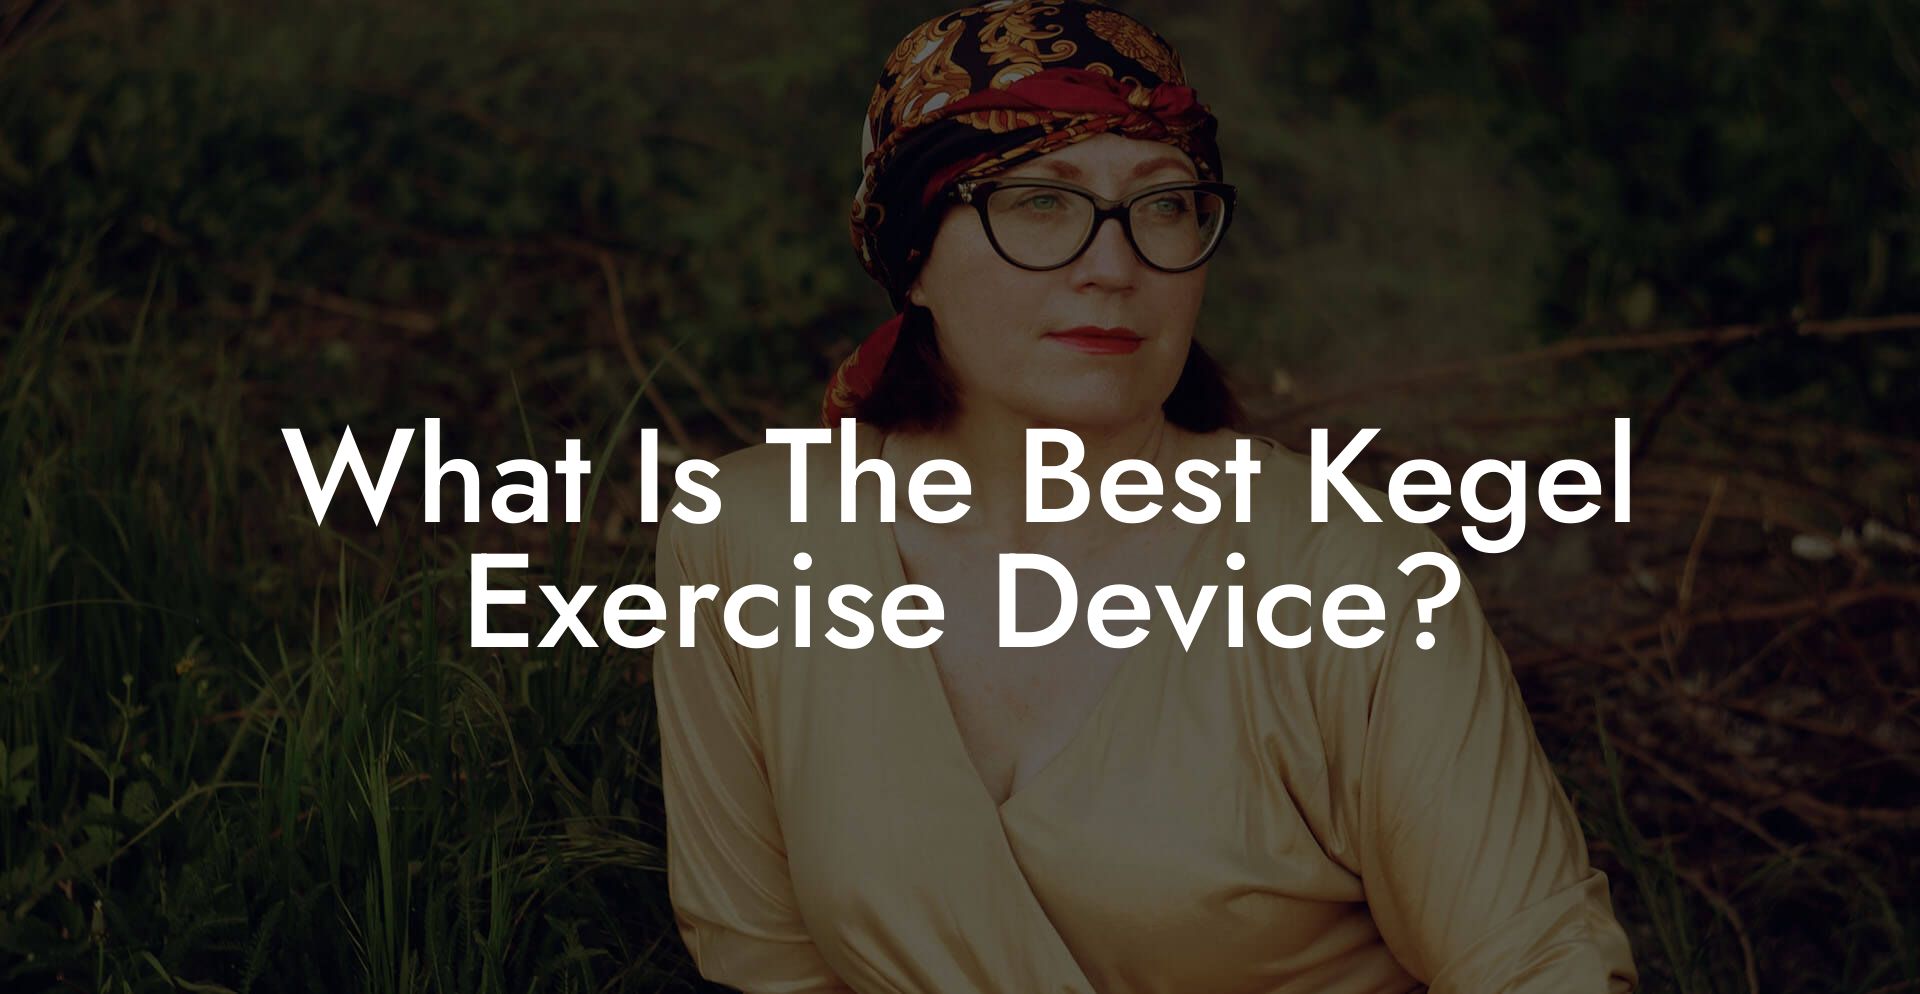 What Is The Best Kegel Exercise Device?